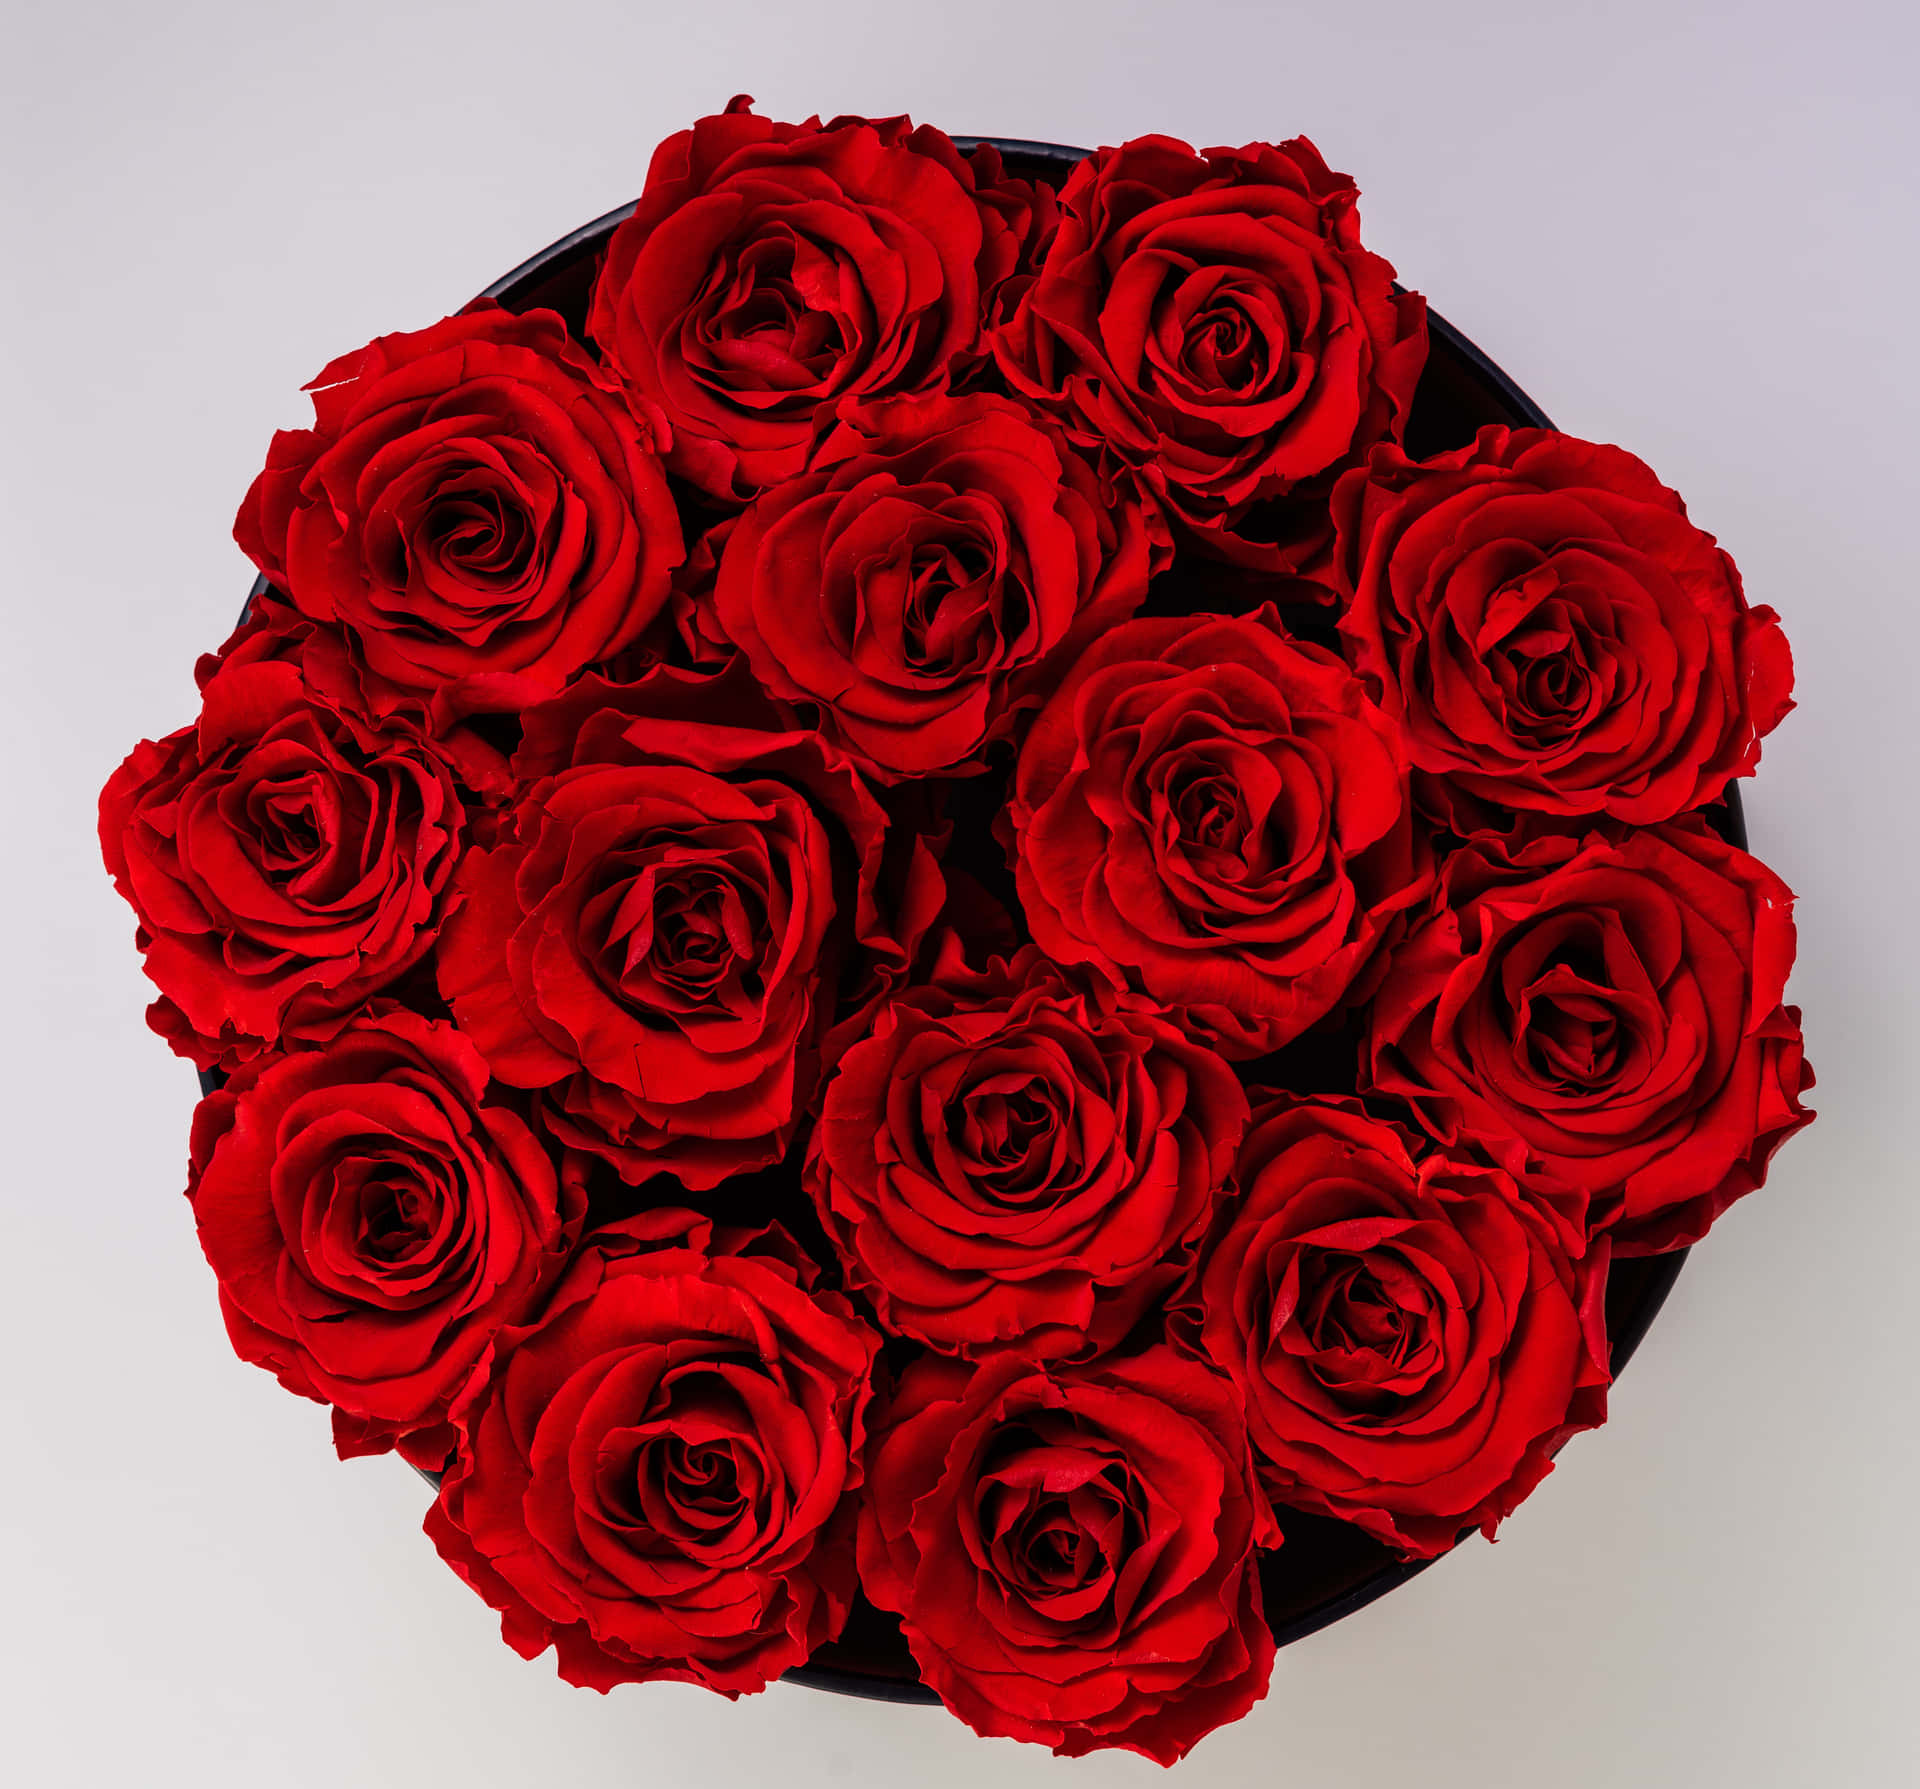 Pure Red Rose Bouquet Wallpaper